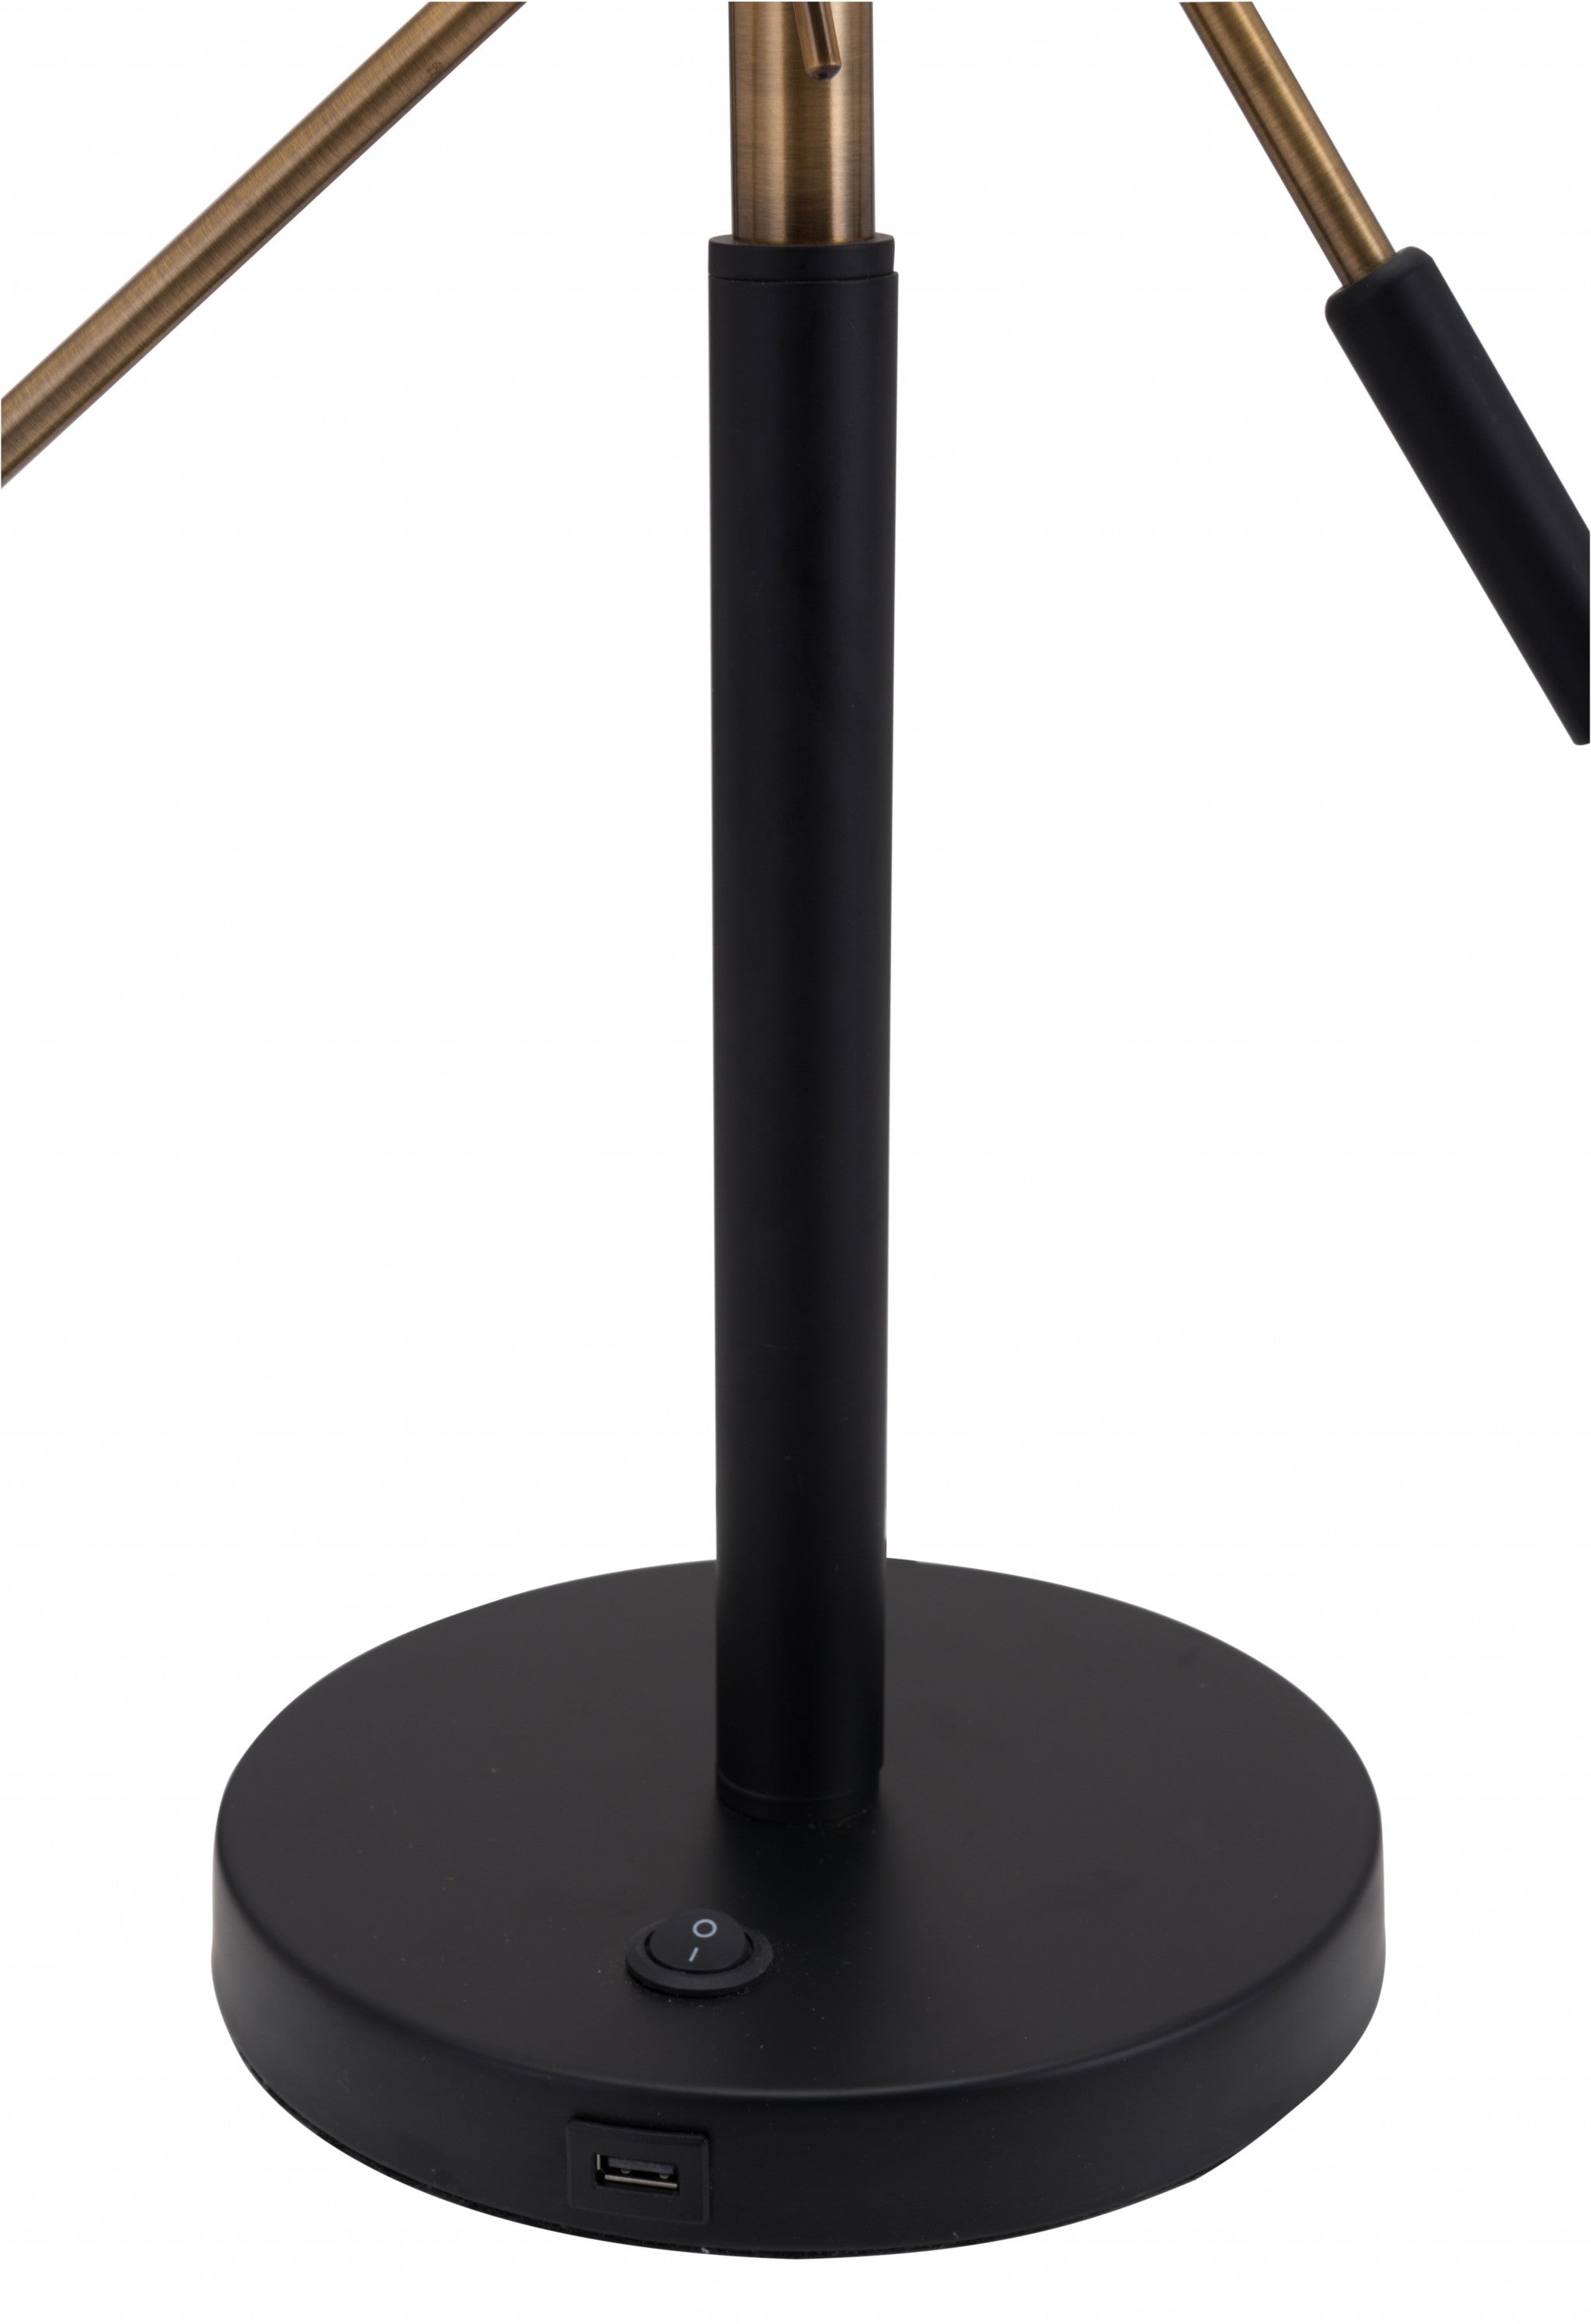 28" Black and Gold Adjustable Table or Desk Lamp